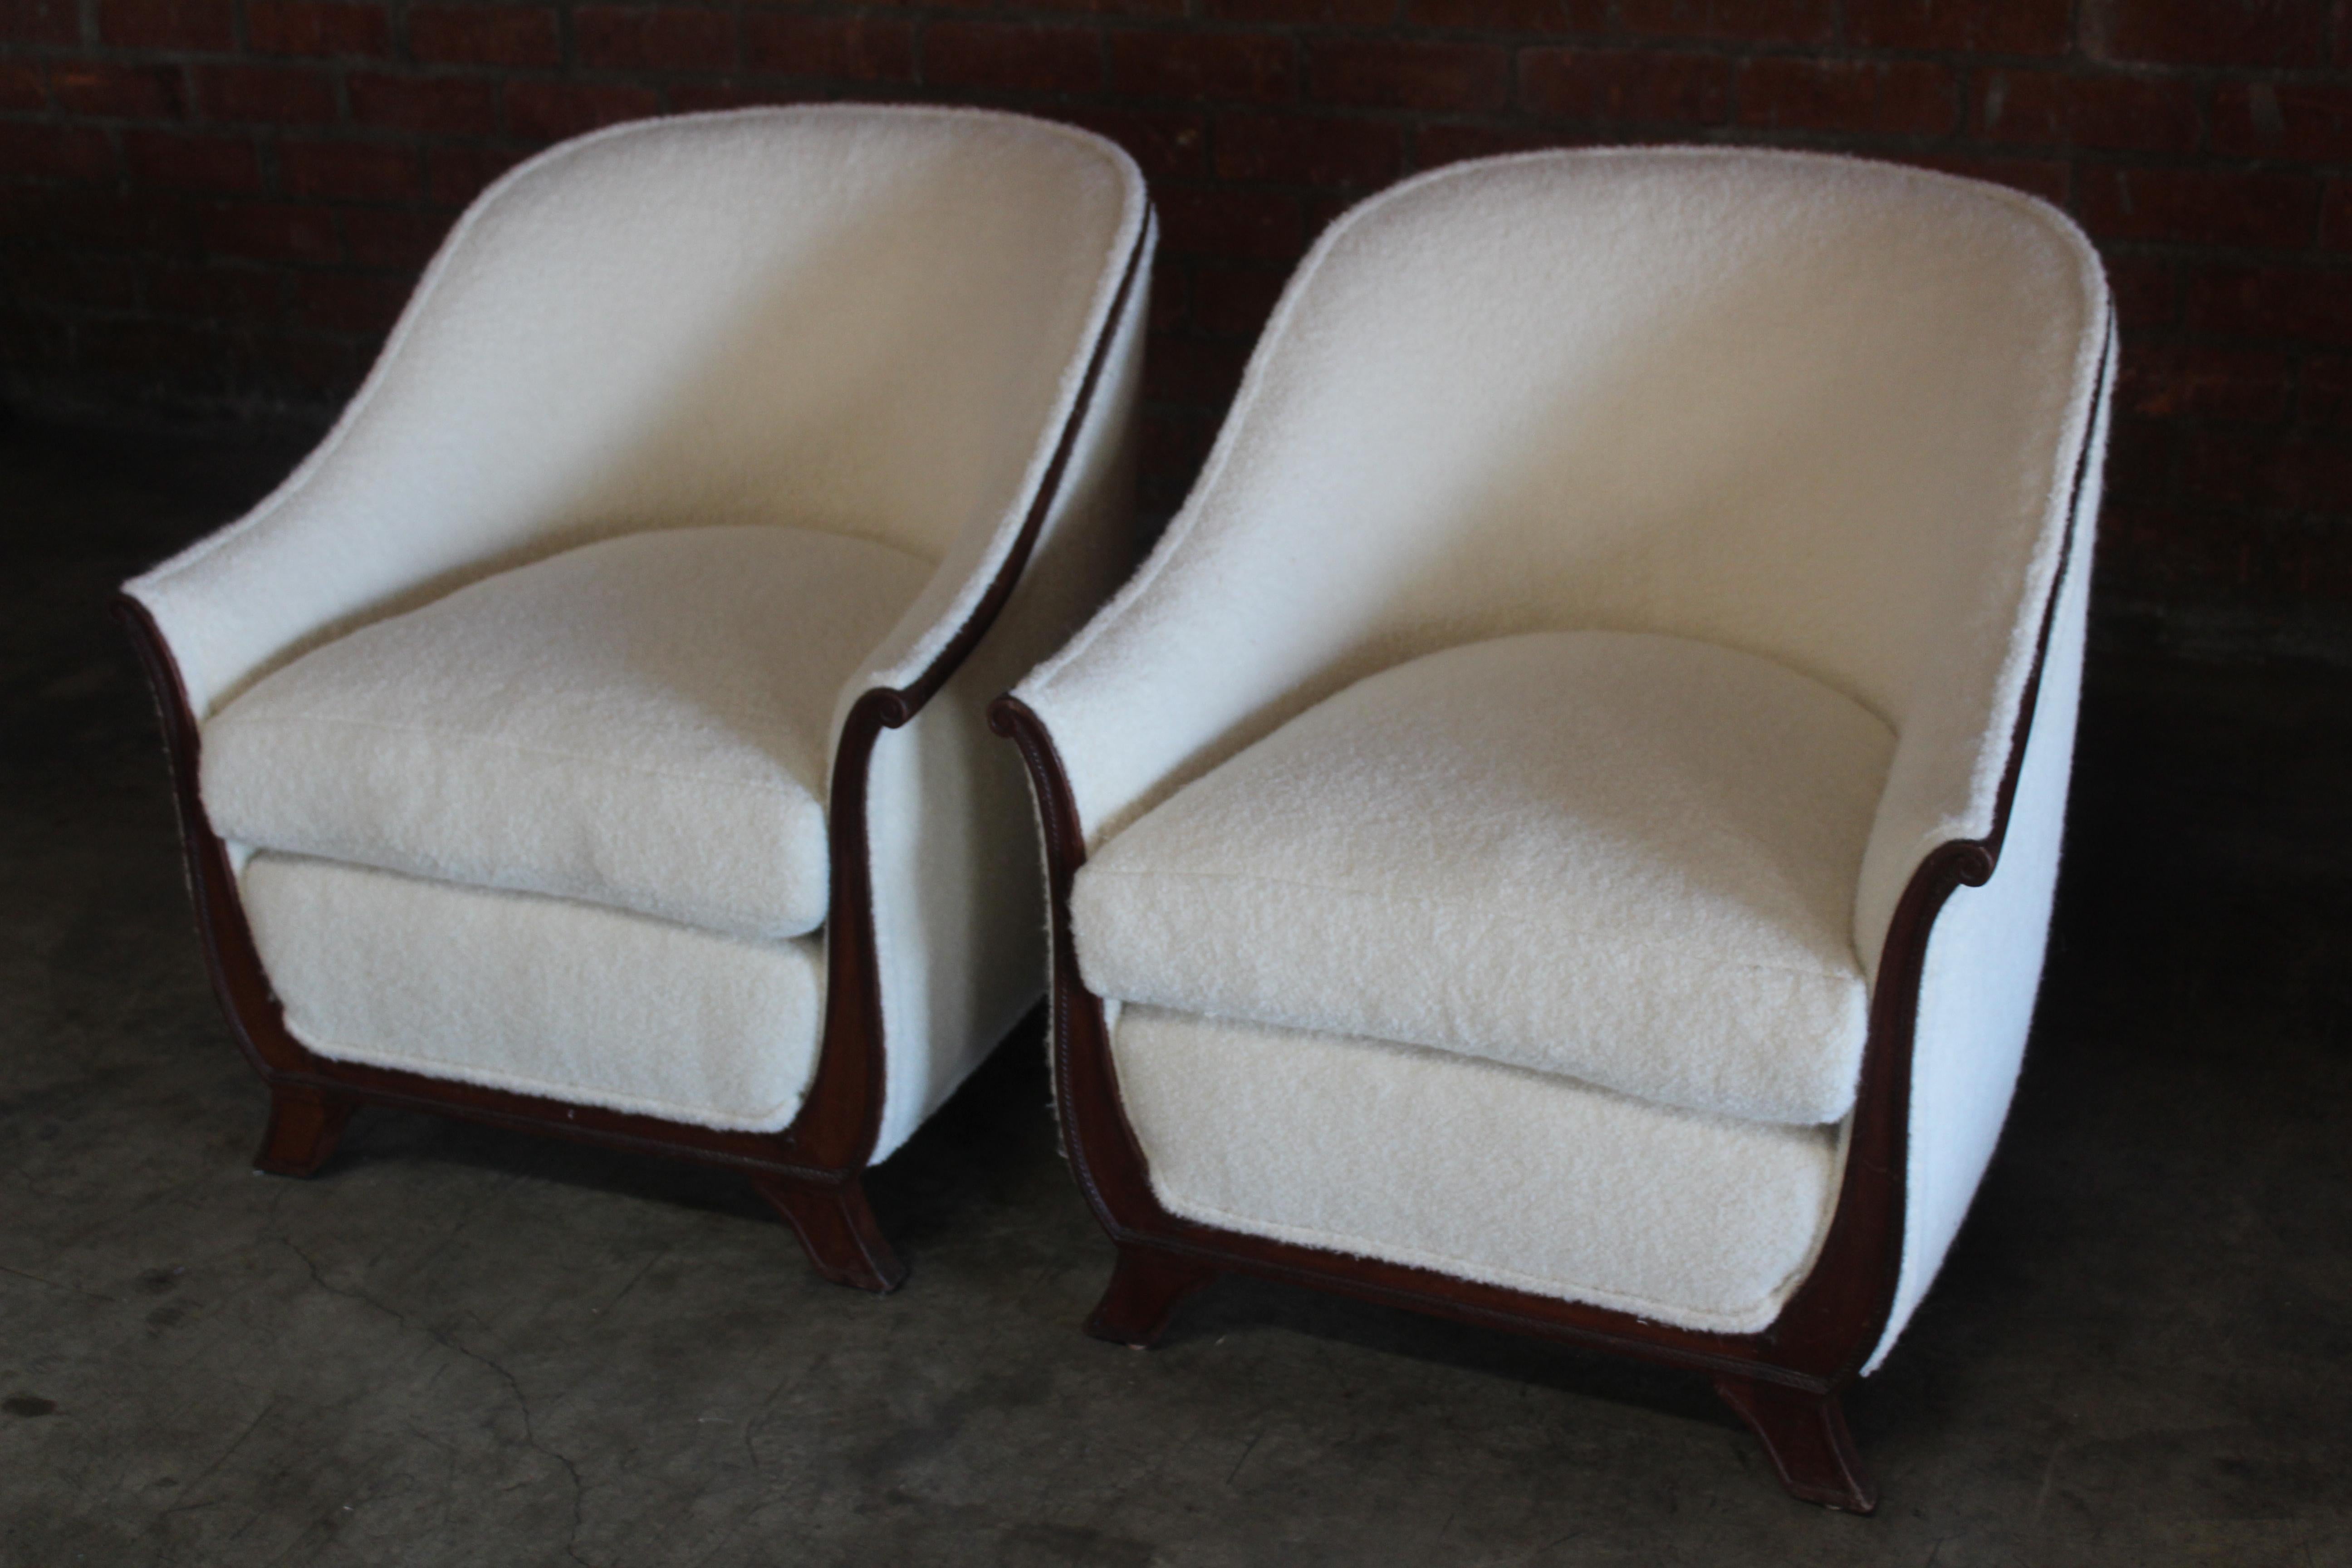 French Pair of Lounge Chairs in Alpaca Wool, France, 1930s. Attributed to Jules Leleu